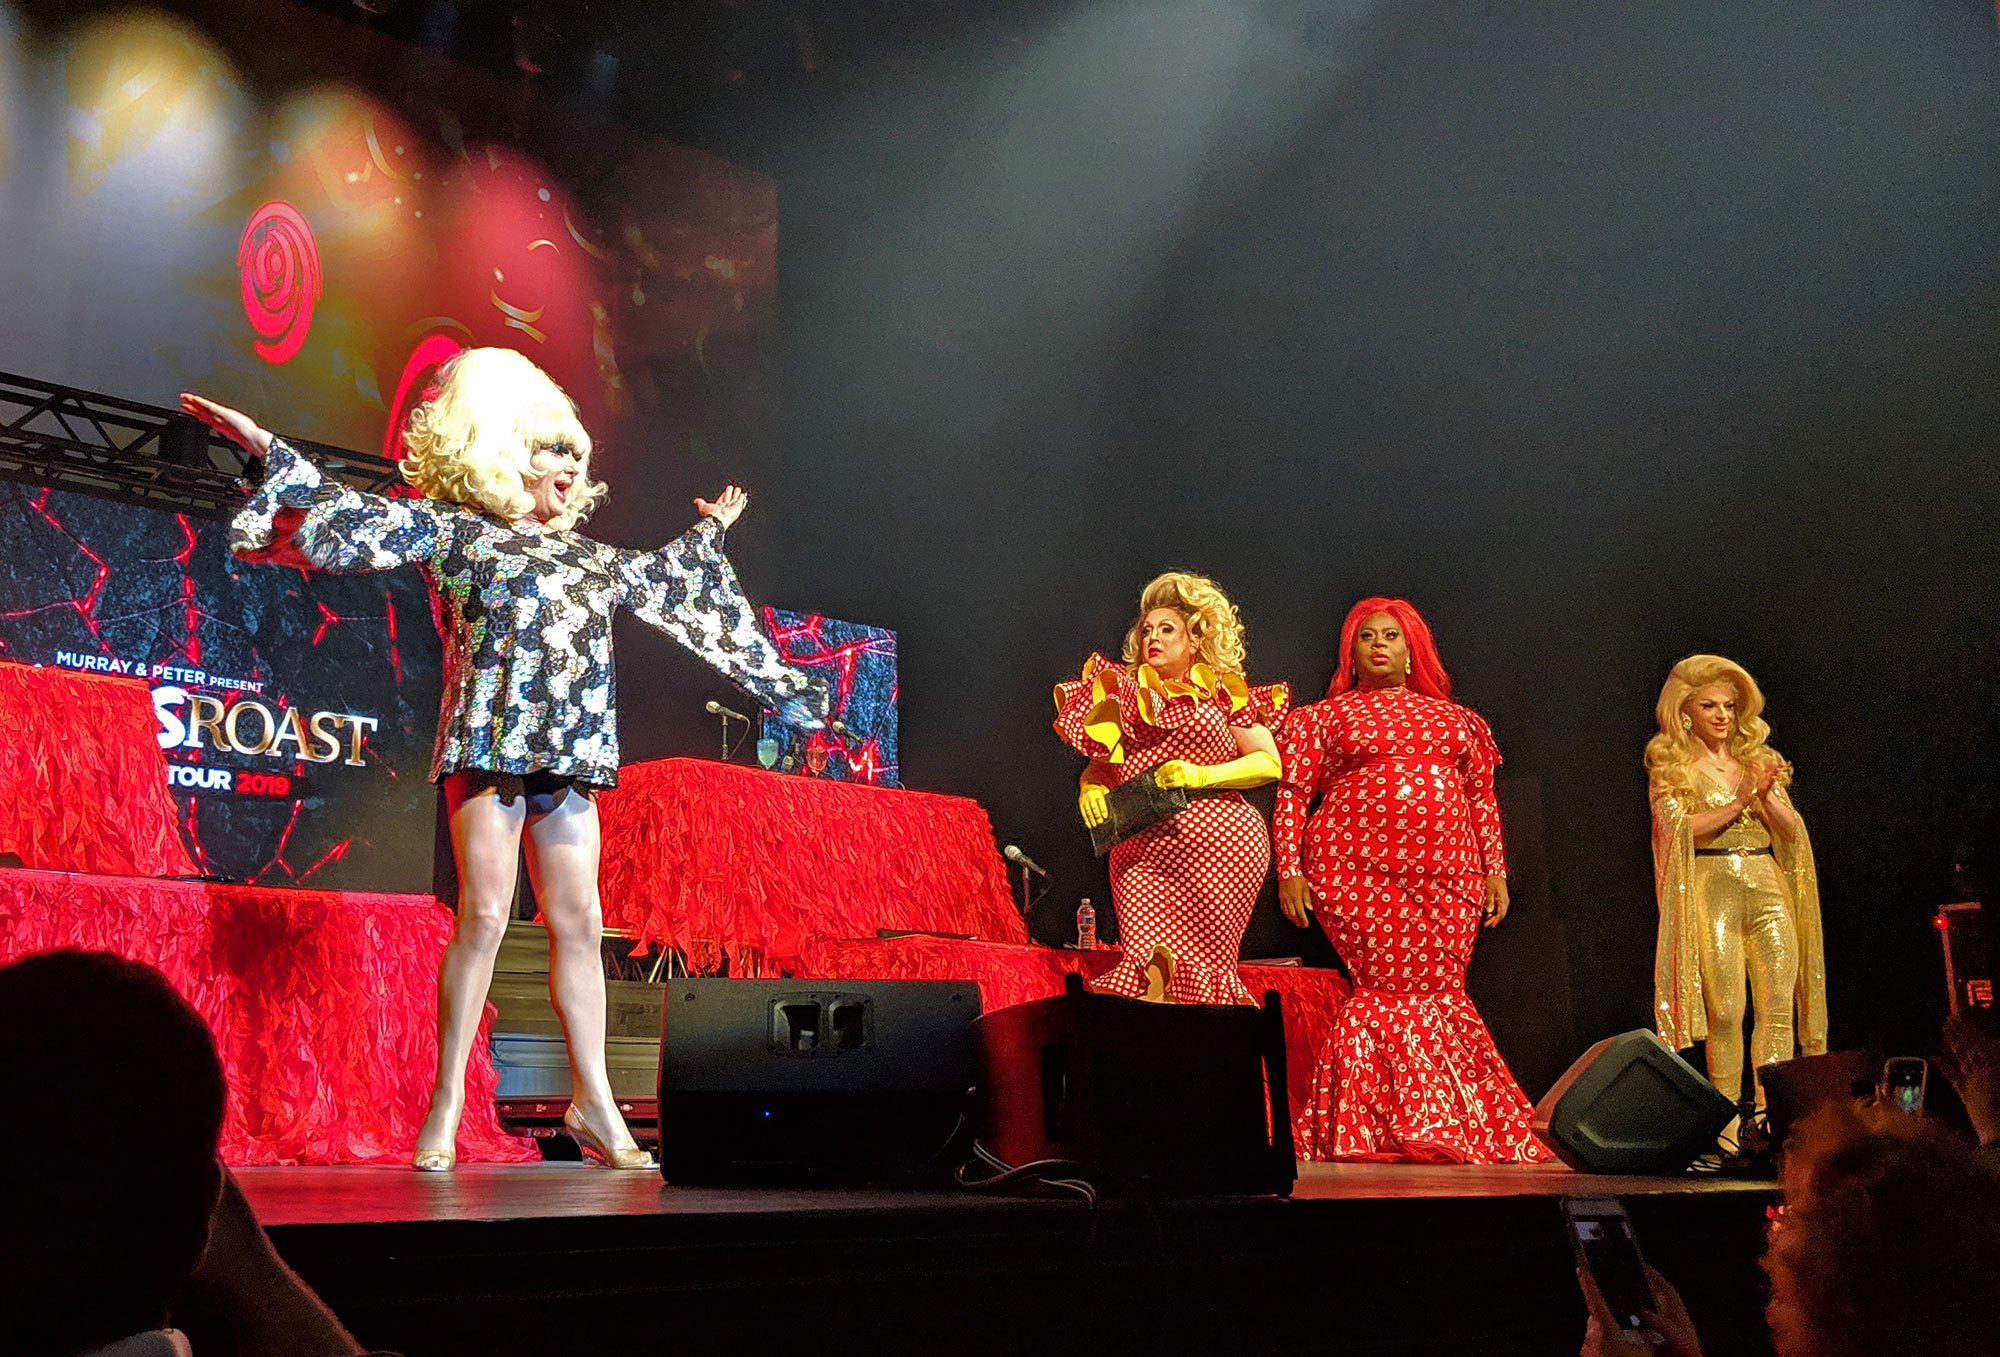 Lady Bunny at the Hater's Roast in Washington D.C.